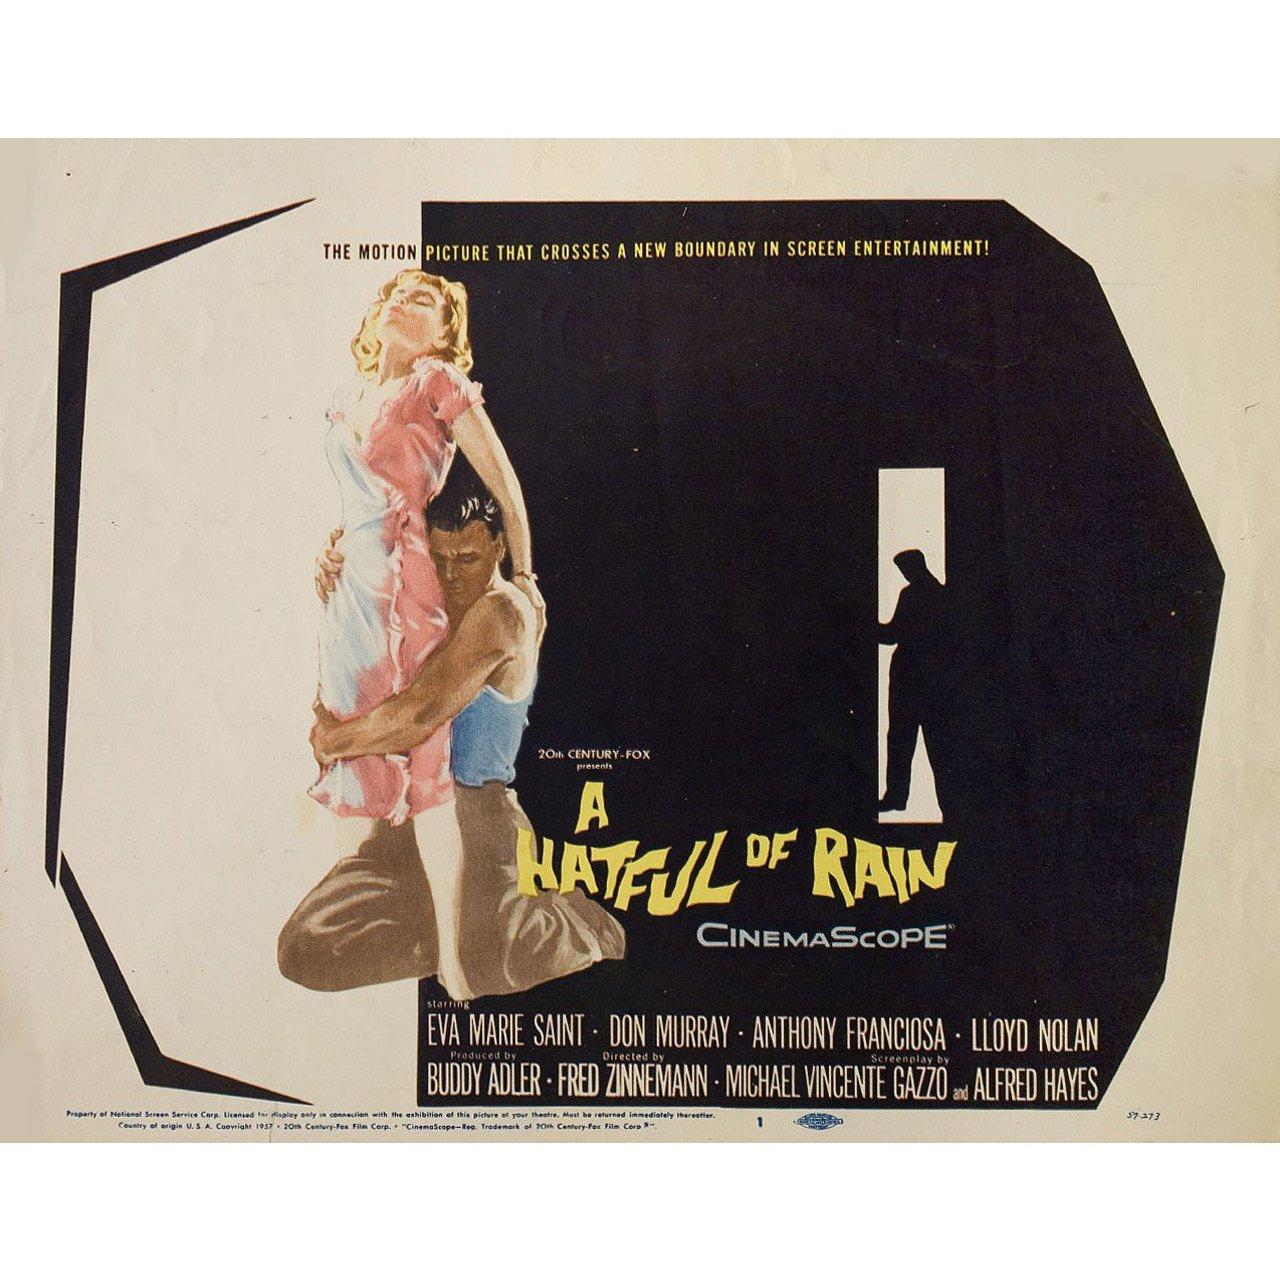 Original 1957 U.S. title card for the film “A Hatful of Rain” directed by Fred Zinnemann with Don Murray / Eva Marie Saint / Anthony Franciosa / Lloyd Nolan. Fine condition. Please note: the size is stated in inches and the actual size can vary by